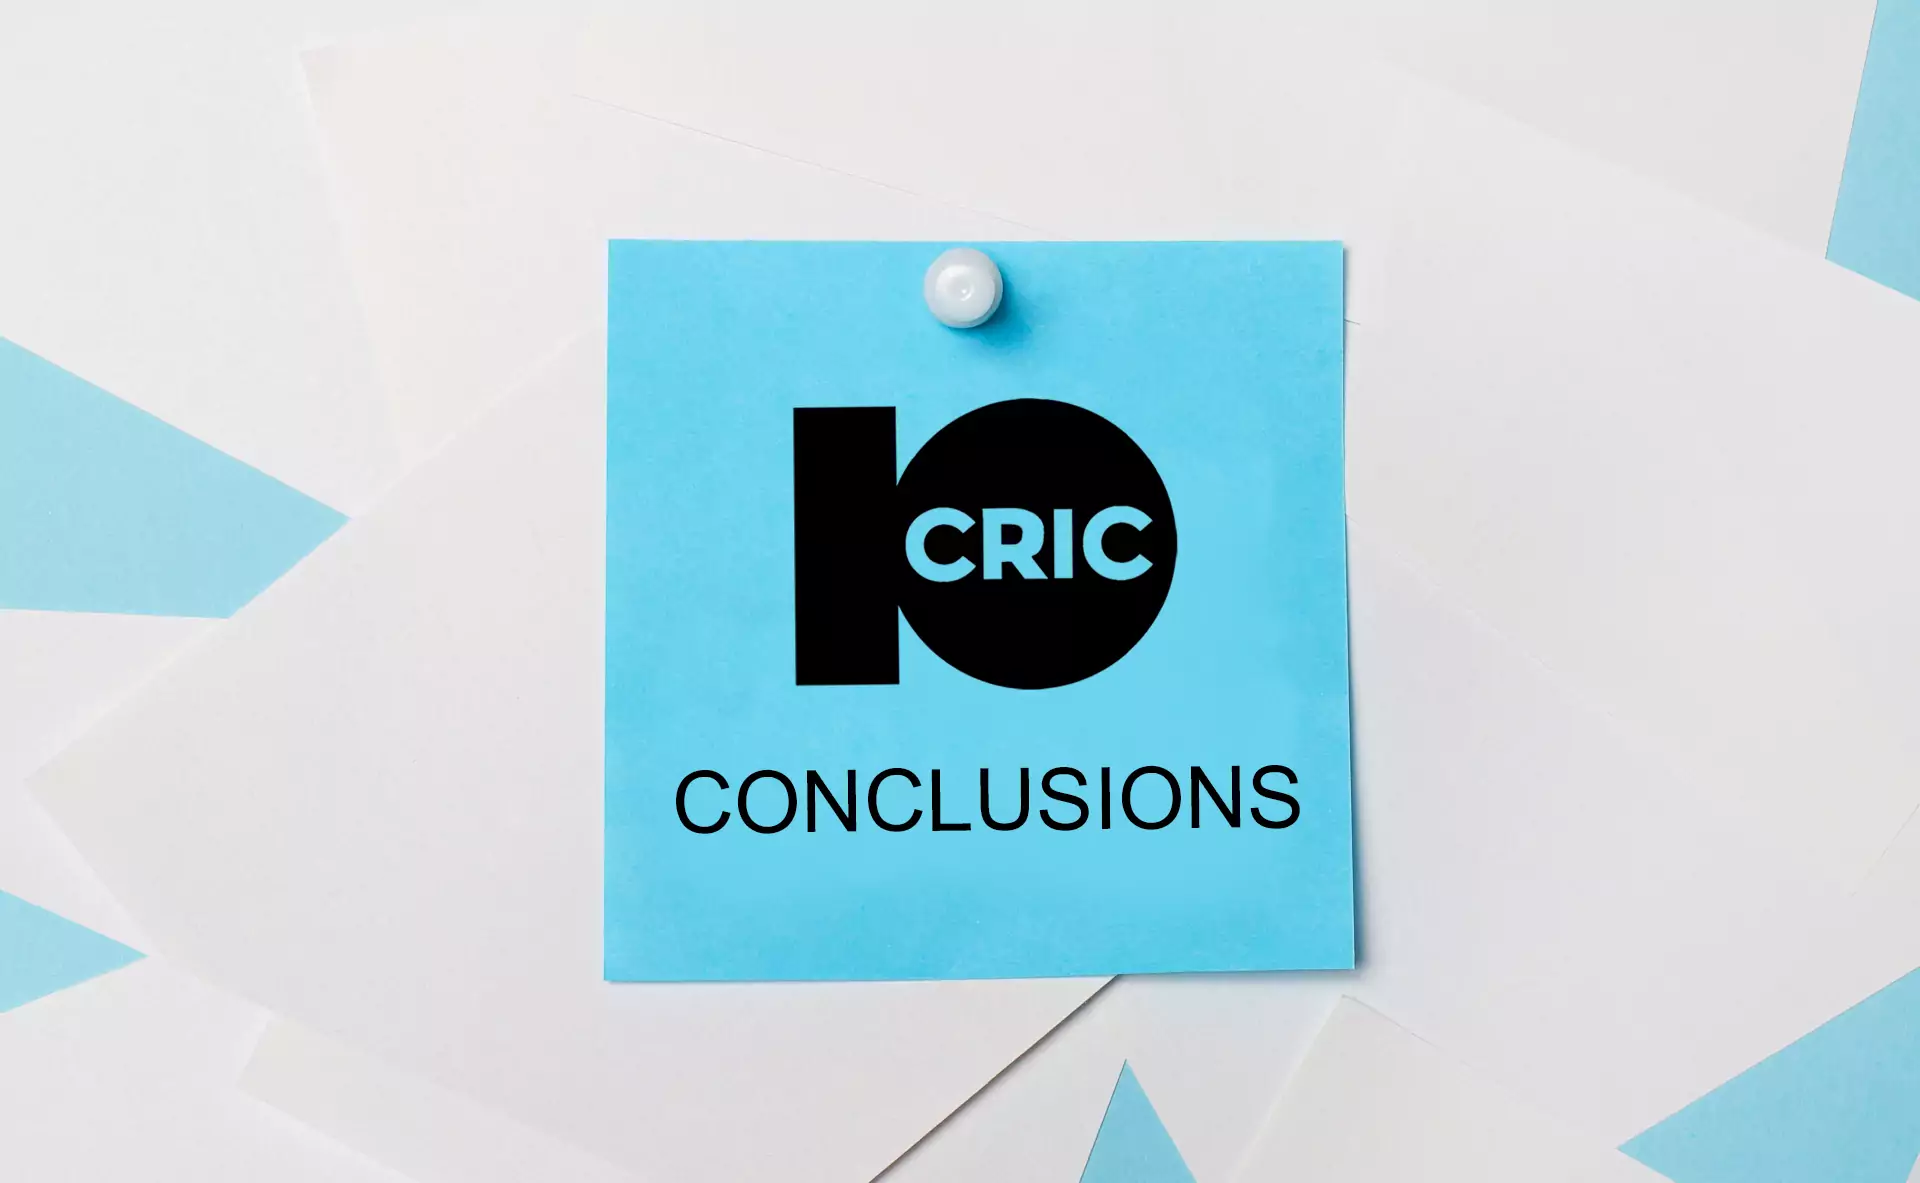 10cric is one of the best betting and casino sites for Indian users.